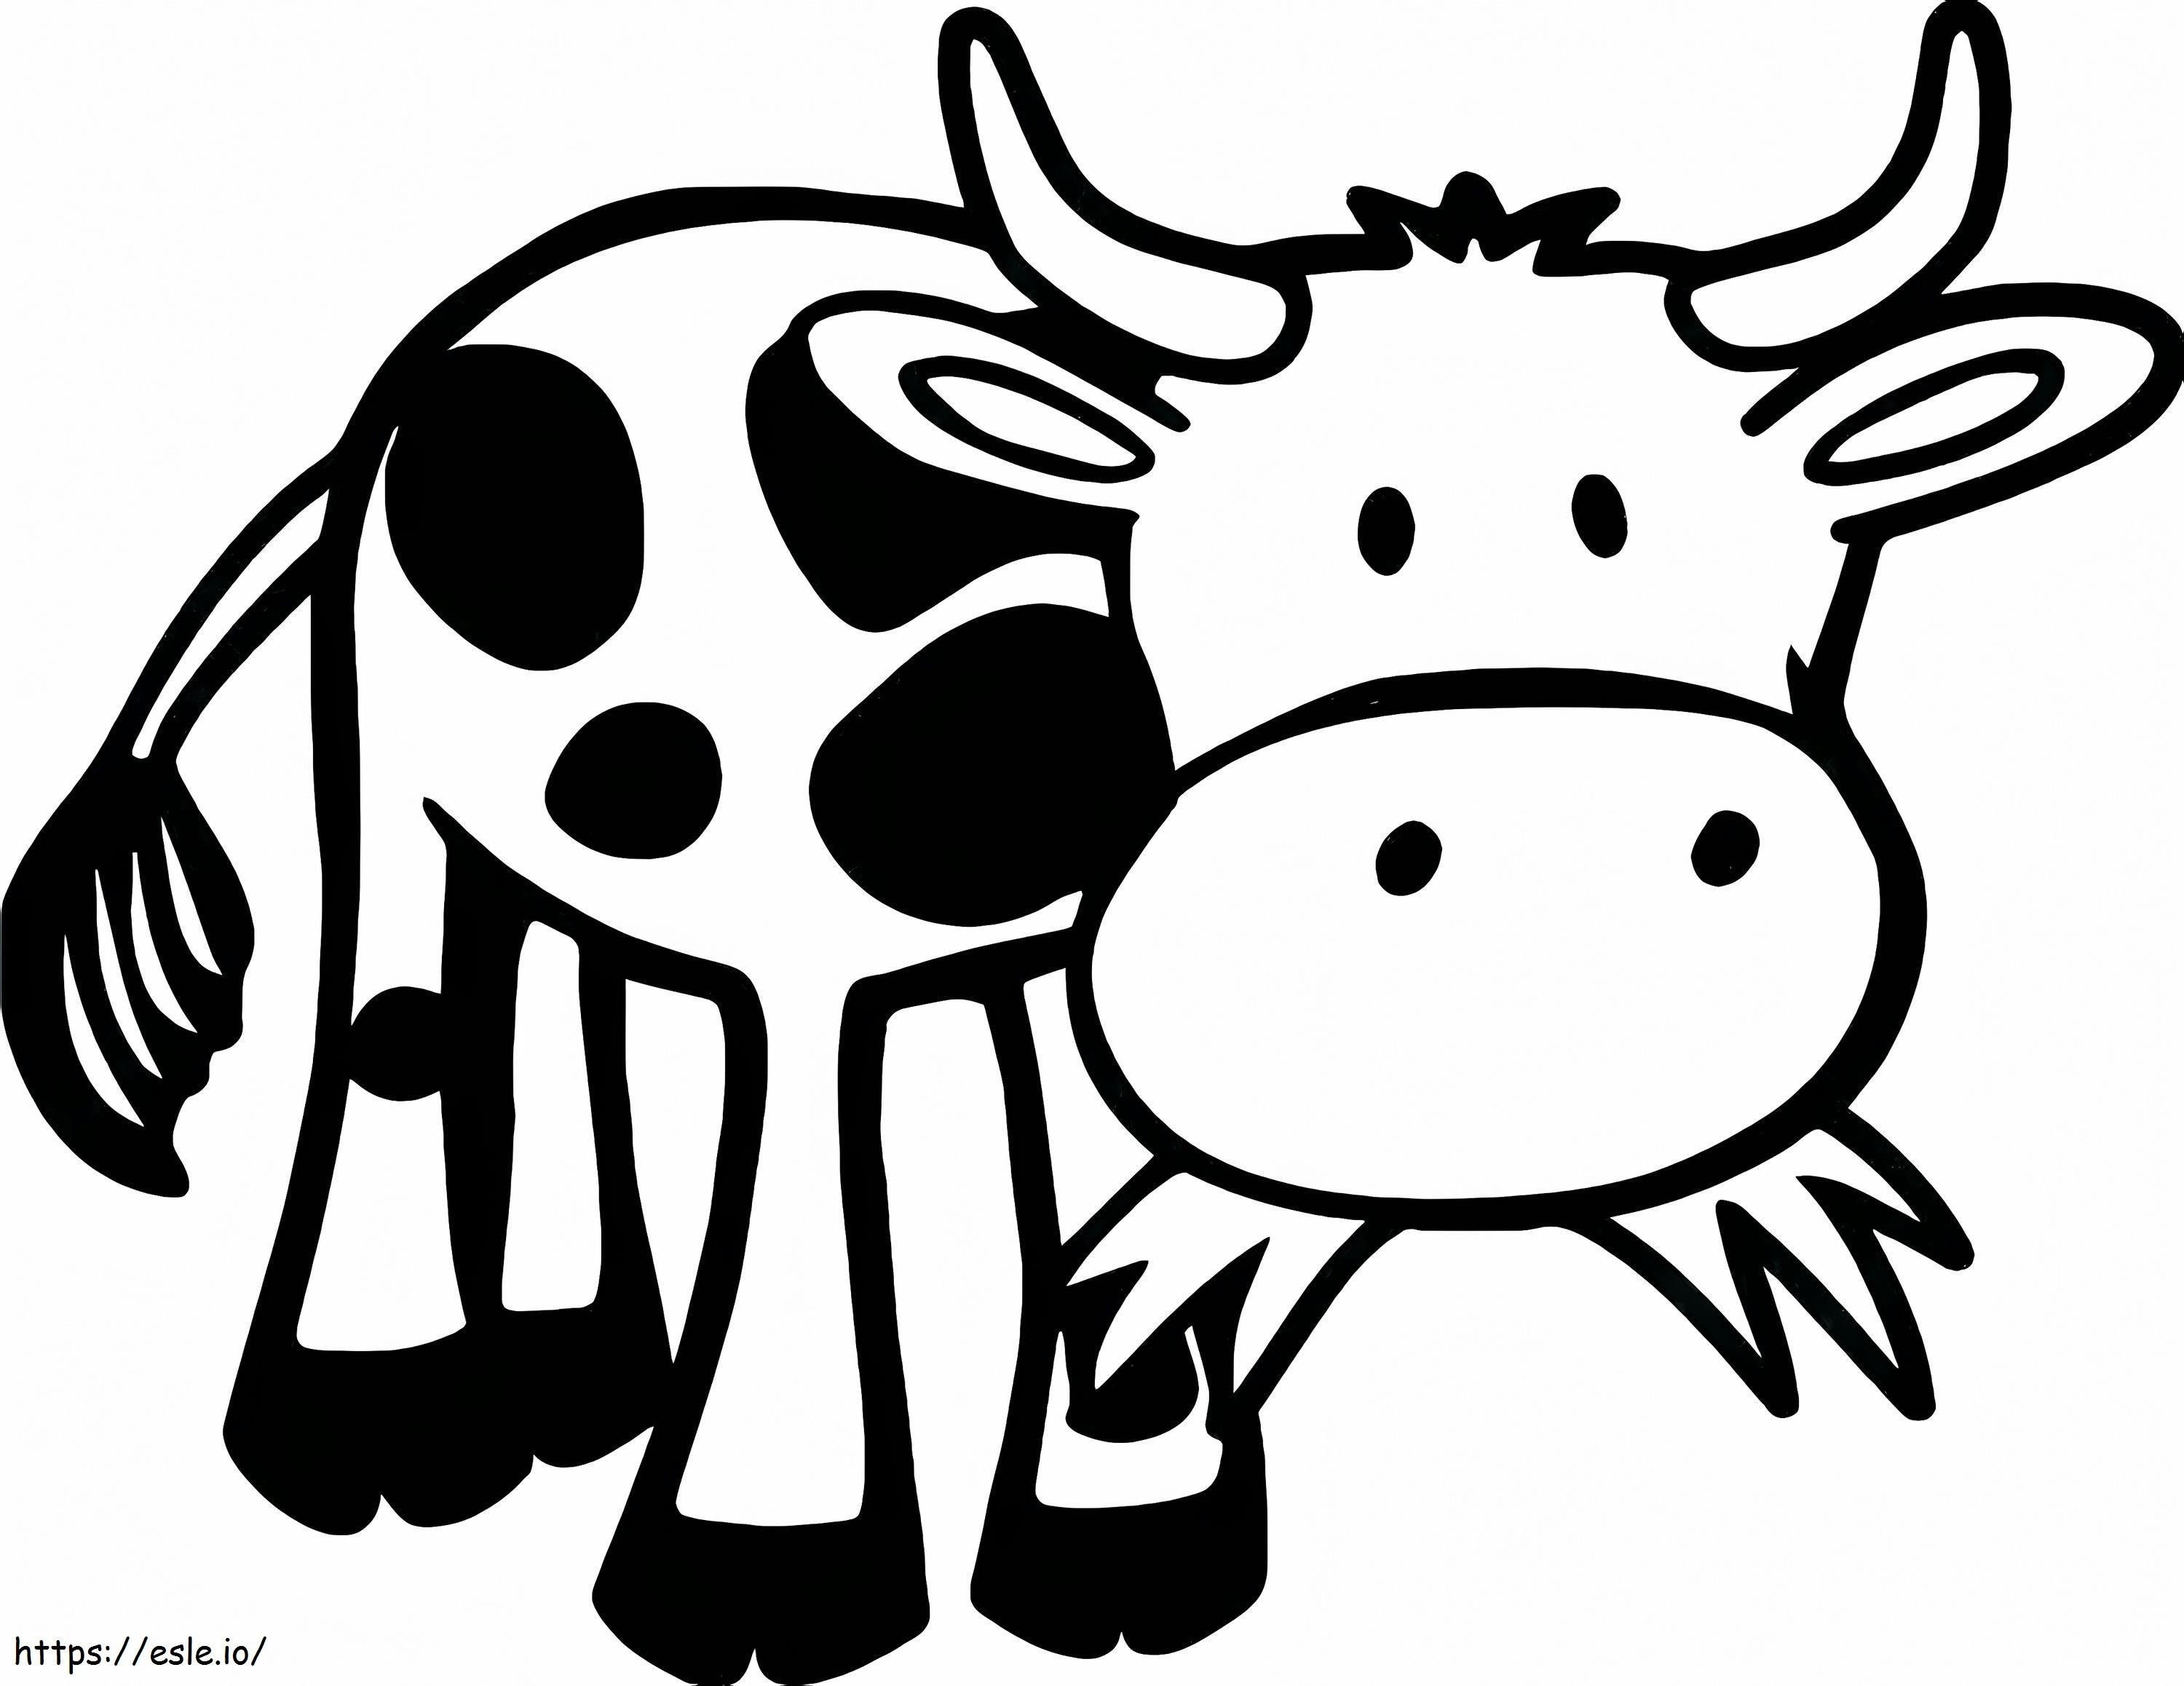  Of Cows Cows Free Printable Cow Page Adult Art Style Illustration Of Valentines Of Cartoon Cows Gambar Mewarnai